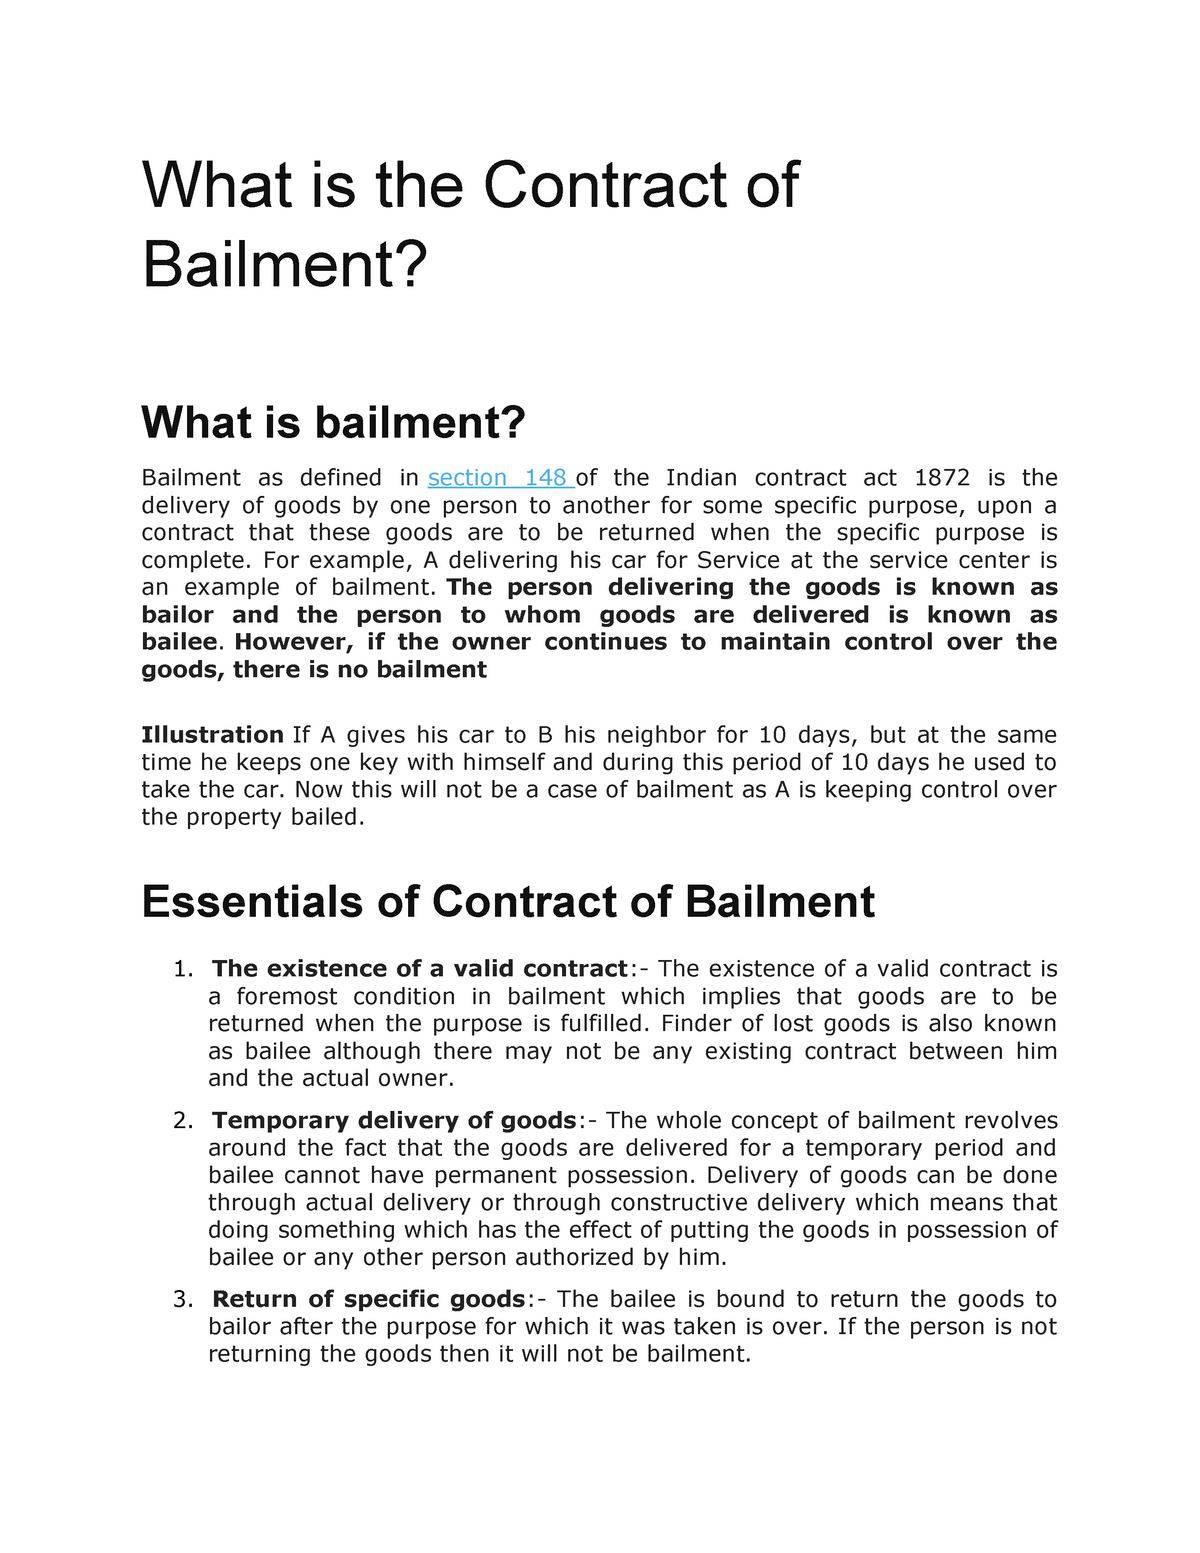 assignment on contract of bailment